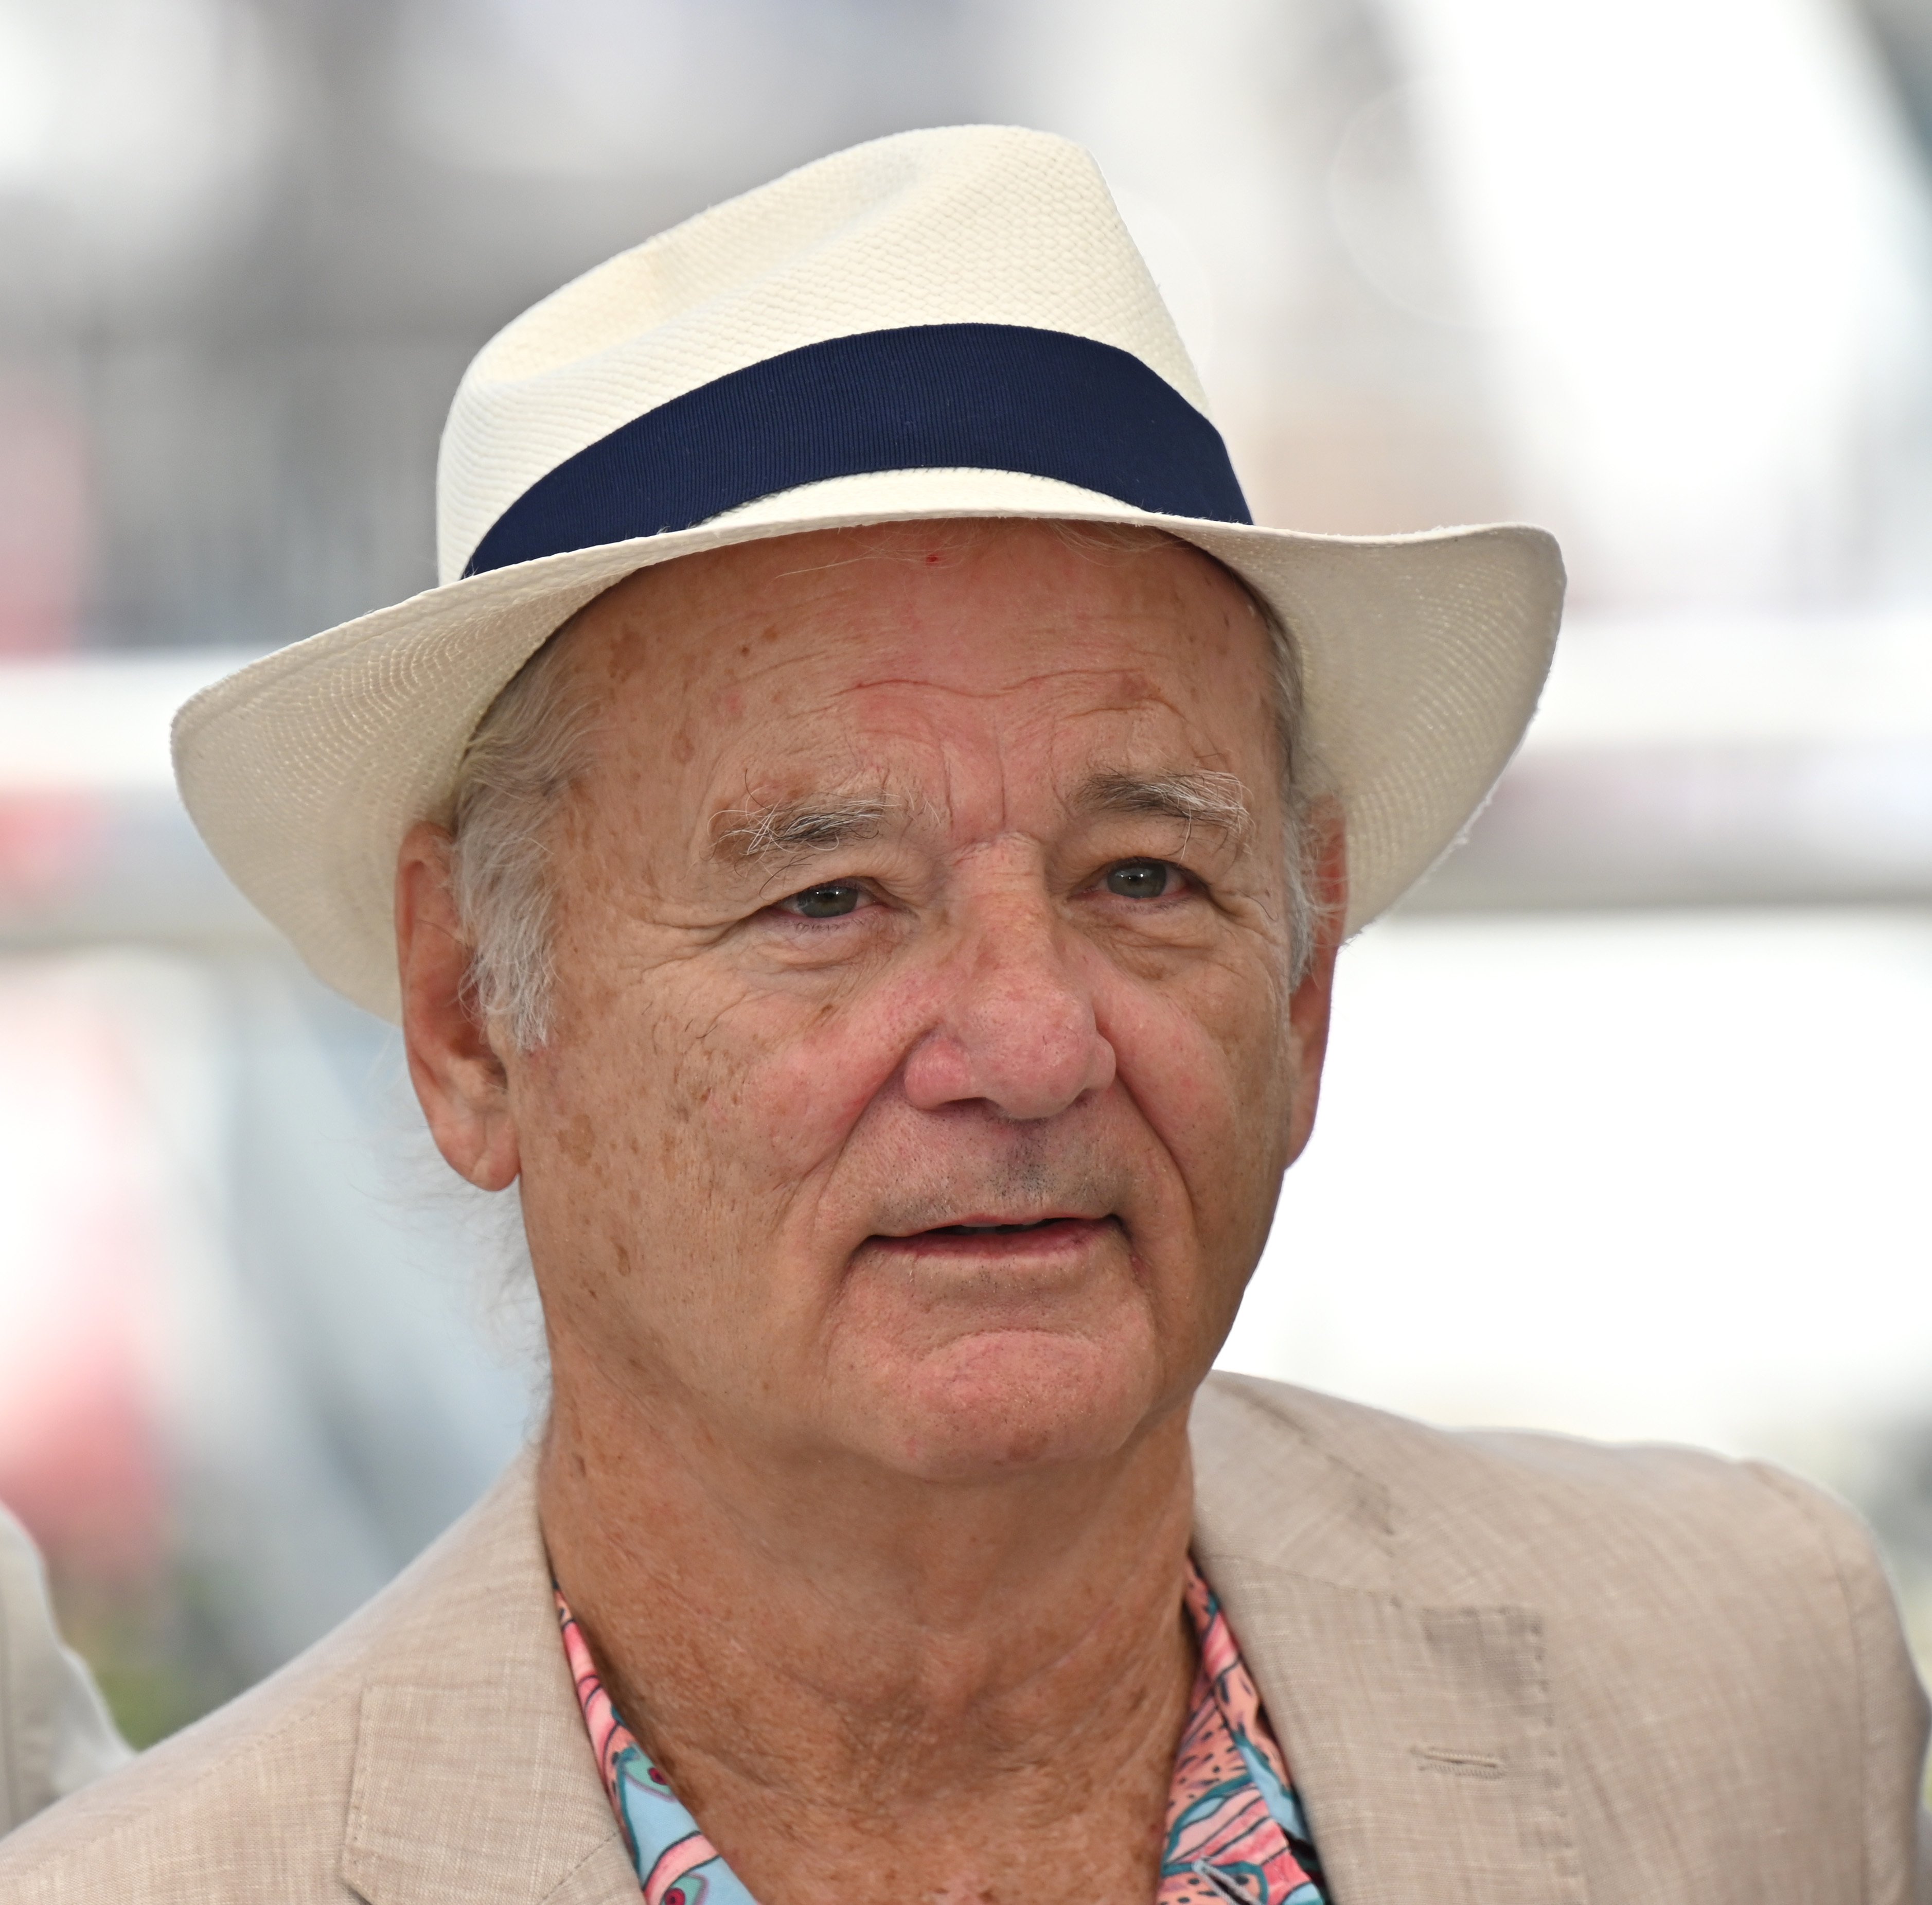 Bill Murray poses during a photocall for the film "New Worlds : The Cradle of Civilization" at the 74th annual Cannes Film Festival in Cannes, France on July 16, 2021. | Source: Getty Images